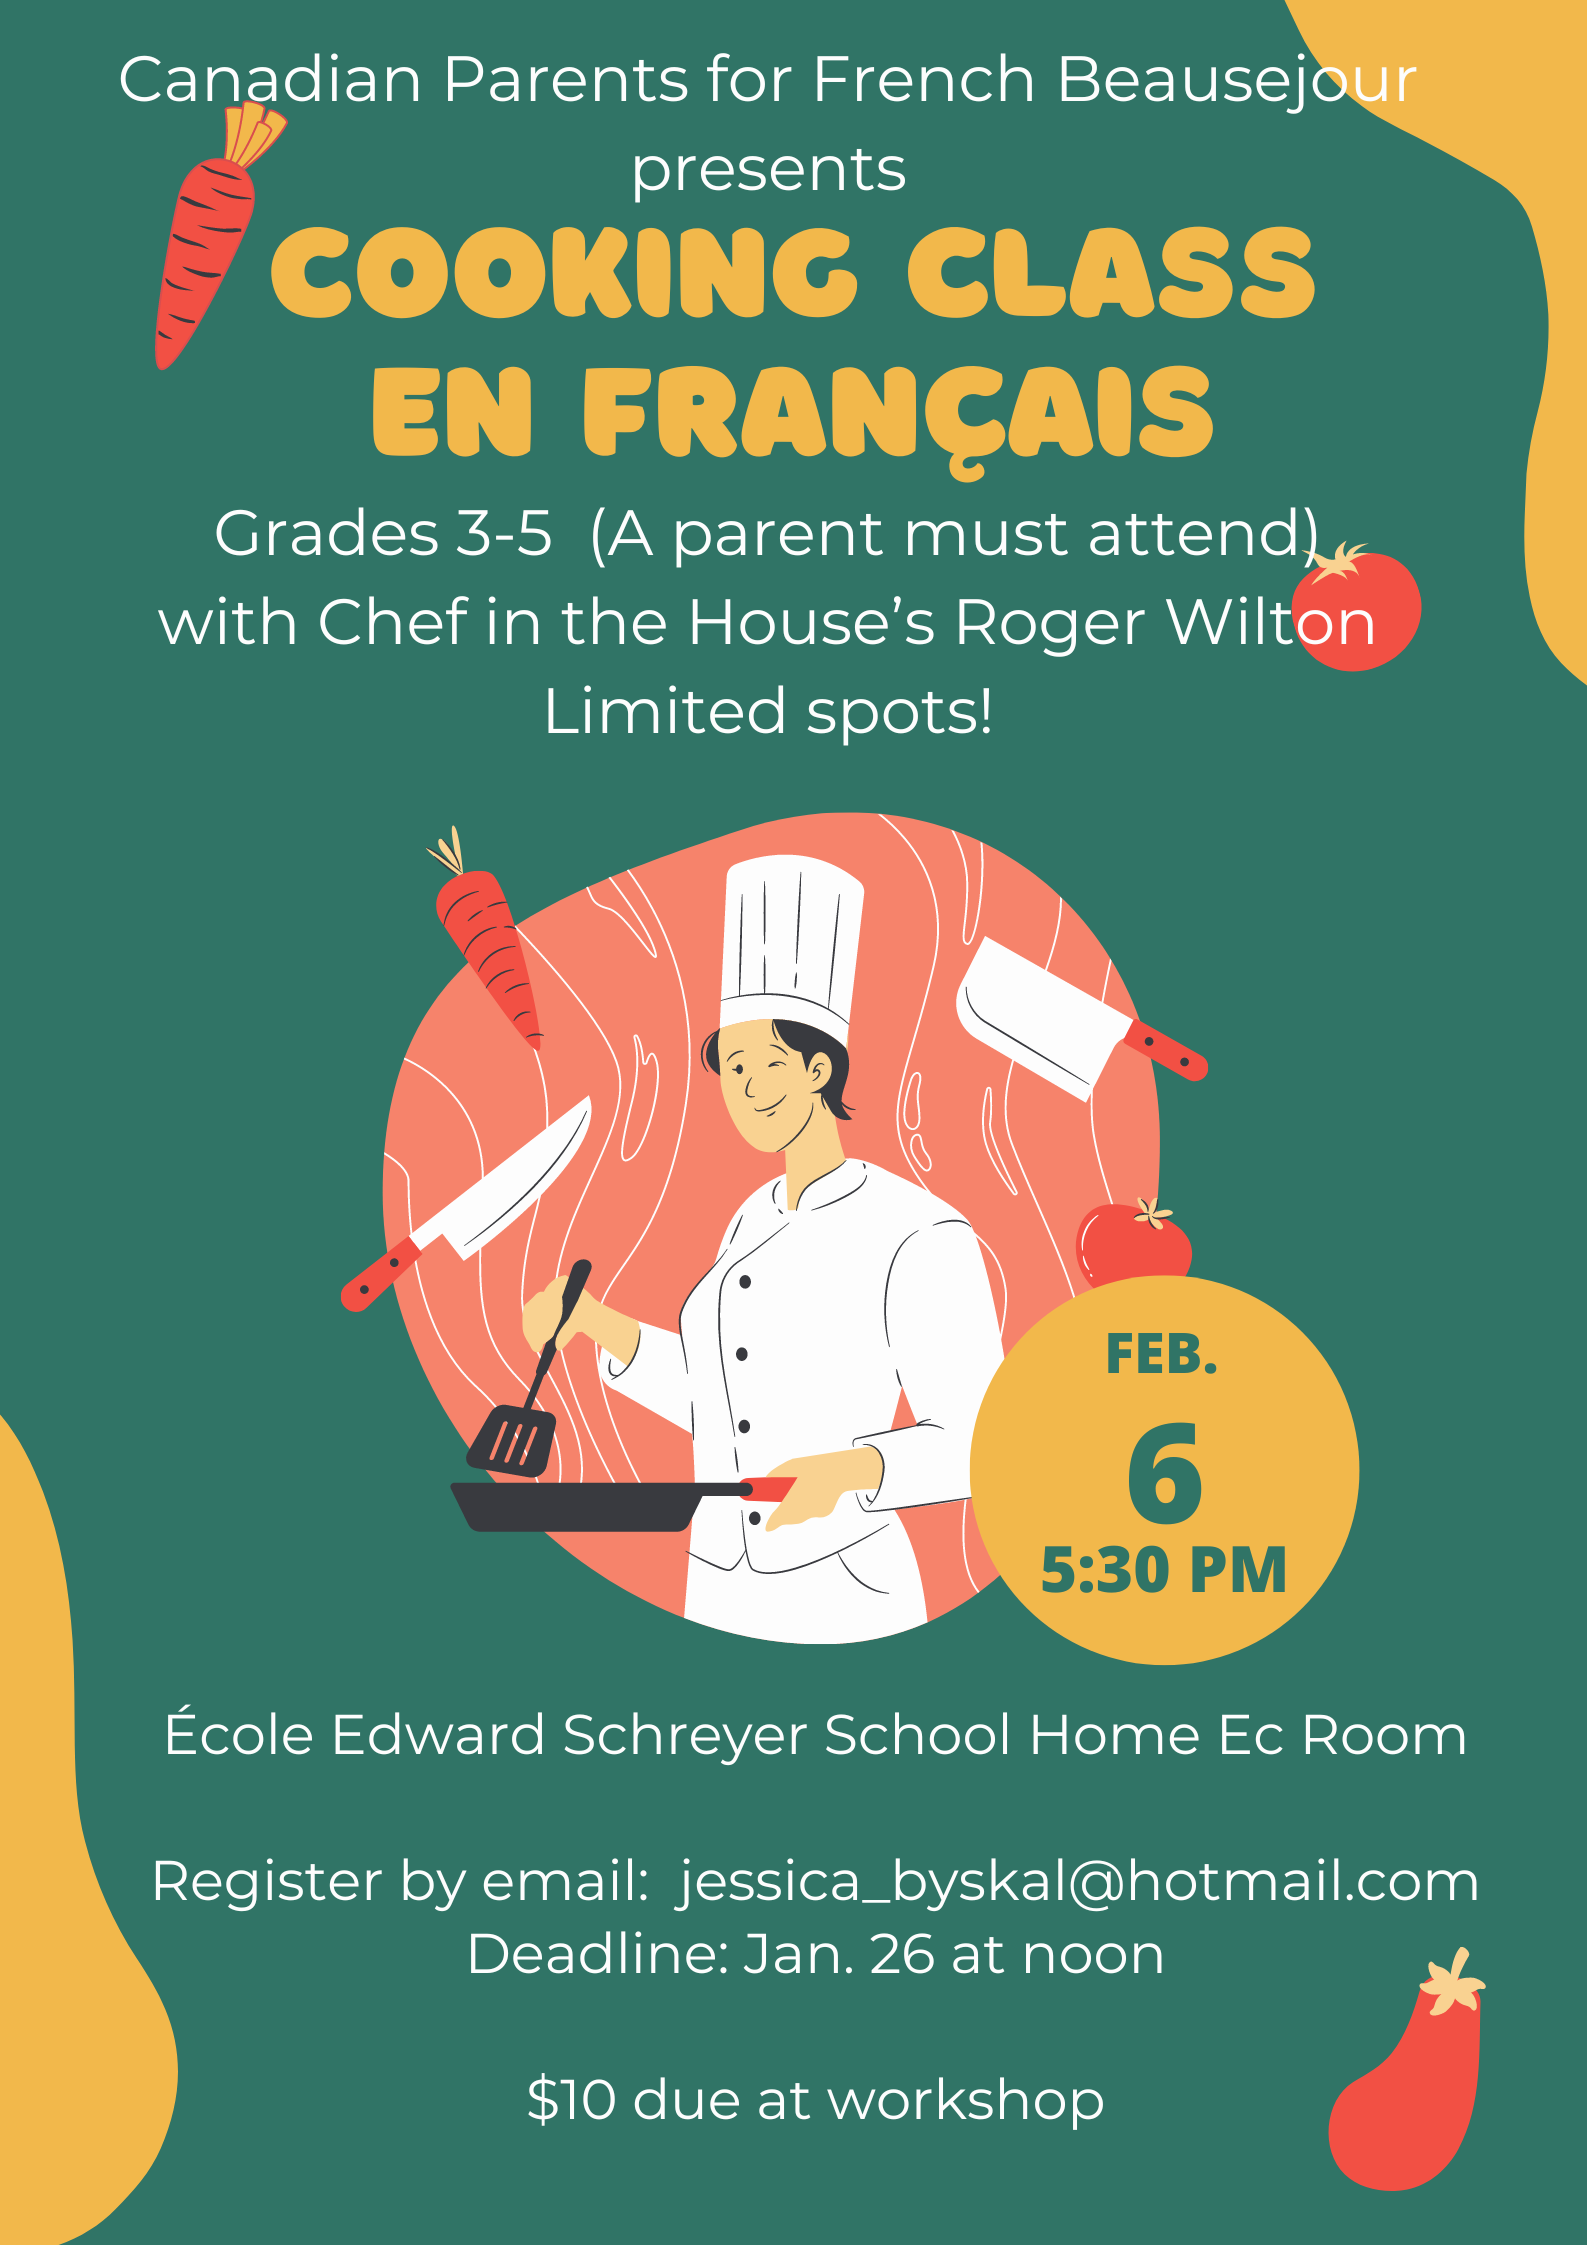 Grade 3-5 French Immersion cooking class details